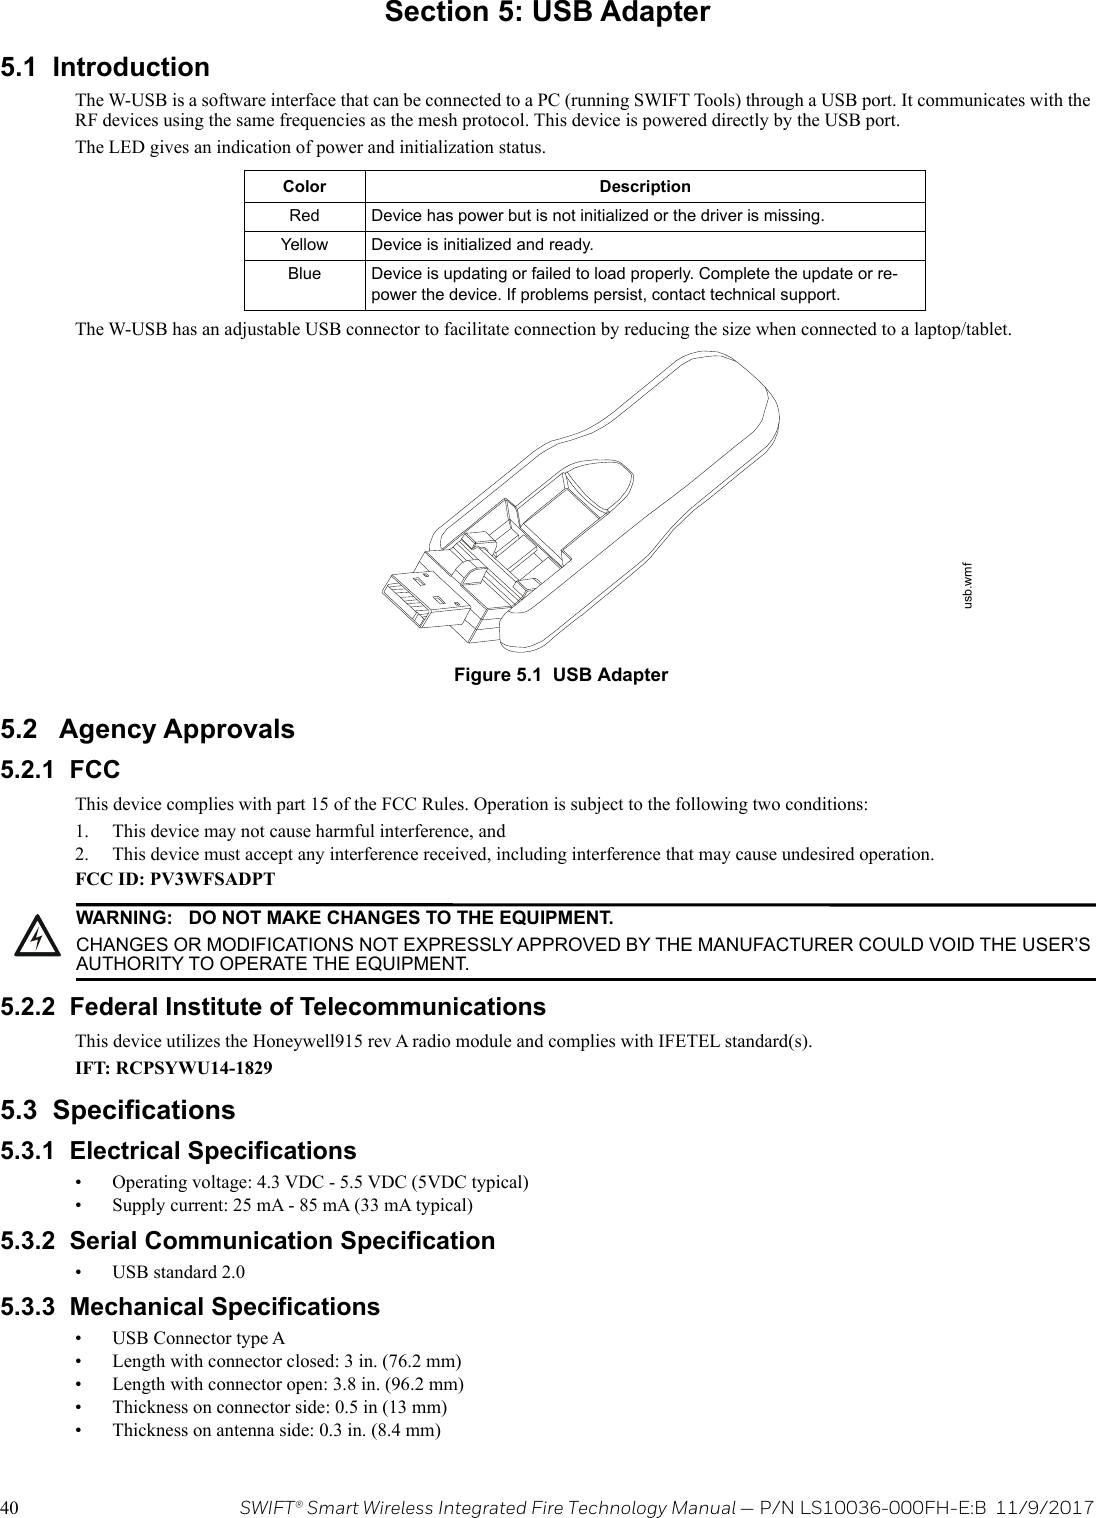 40 SWIFT® Smart Wireless Integrated Fire Technology Manual — P/N LS10036-000FH-E:B  11/9/2017Section 5: USB Adapter5.1  IntroductionThe W-USB is a software interface that can be connected to a PC (running SWIFT Tools) through a USB port. It communicates with the RF devices using the same frequencies as the mesh protocol. This device is powered directly by the USB port.The LED gives an indication of power and initialization status.The W-USB has an adjustable USB connector to facilitate connection by reducing the size when connected to a laptop/tablet. 5.2   Agency Approvals5.2.1  FCCThis device complies with part 15 of the FCC Rules. Operation is subject to the following two conditions: 1. This device may not cause harmful interference, and 2. This device must accept any interference received, including interference that may cause undesired operation.FCC ID: PV3WFSADPT5.2.2  Federal Institute of TelecommunicationsThis device utilizes the Honeywell915 rev A radio module and complies with IFETEL standard(s).IFT: RCPSYWU14-18295.3  Specifications5.3.1  Electrical Specifications• Operating voltage: 4.3 VDC - 5.5 VDC (5VDC typical)• Supply current: 25 mA - 85 mA (33 mA typical)5.3.2  Serial Communication Specification• USB standard 2.0 5.3.3  Mechanical Specifications• USB Connector type A• Length with connector closed: 3 in. (76.2 mm)• Length with connector open: 3.8 in. (96.2 mm)• Thickness on connector side: 0.5 in (13 mm)• Thickness on antenna side: 0.3 in. (8.4 mm)Color DescriptionRed Device has power but is not initialized or the driver is missing.Yellow Device is initialized and ready.Blue Device is updating or failed to load properly. Complete the update or re-power the device. If problems persist, contact technical support.Figure 5.1  USB Adapterusb.wmf!WARNING: DO NOT MAKE CHANGES TO THE EQUIPMENT.CHANGES OR MODIFICATIONS NOT EXPRESSLY APPROVED BY THE MANUFACTURER COULD VOID THE USER’S AUTHORITY TO OPERATE THE EQUIPMENT.